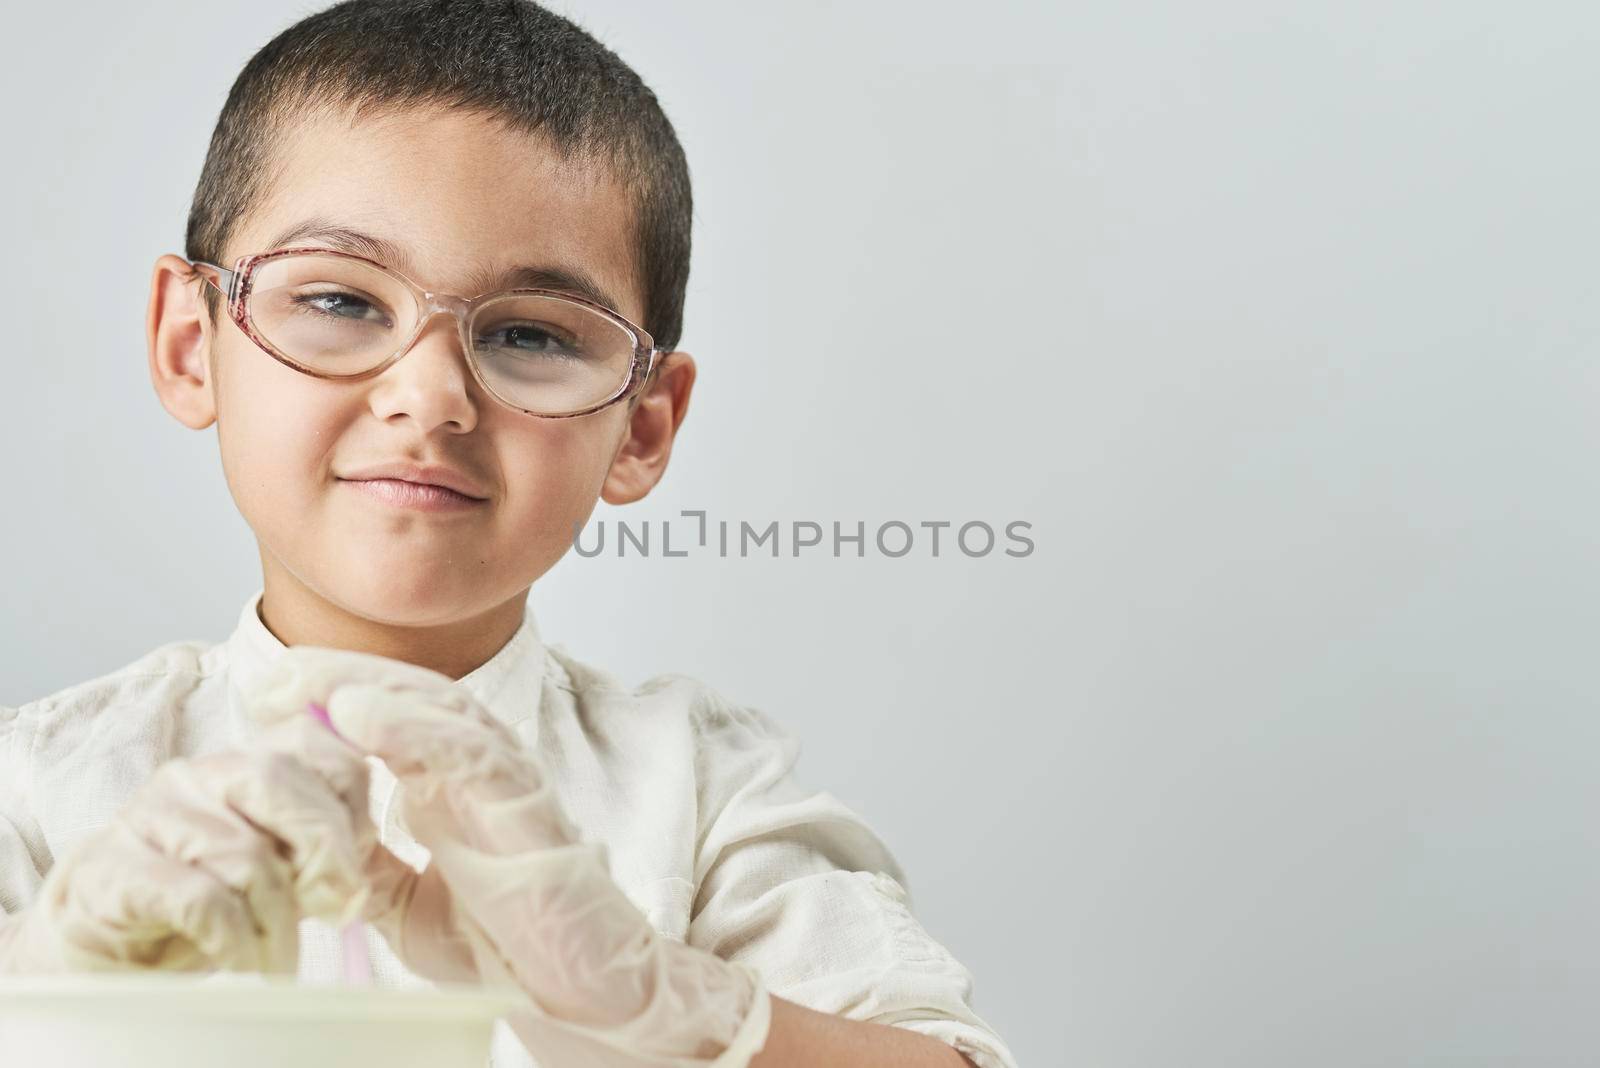 Portrait of 7 years old cute kid in glasses looking at camera against the white background